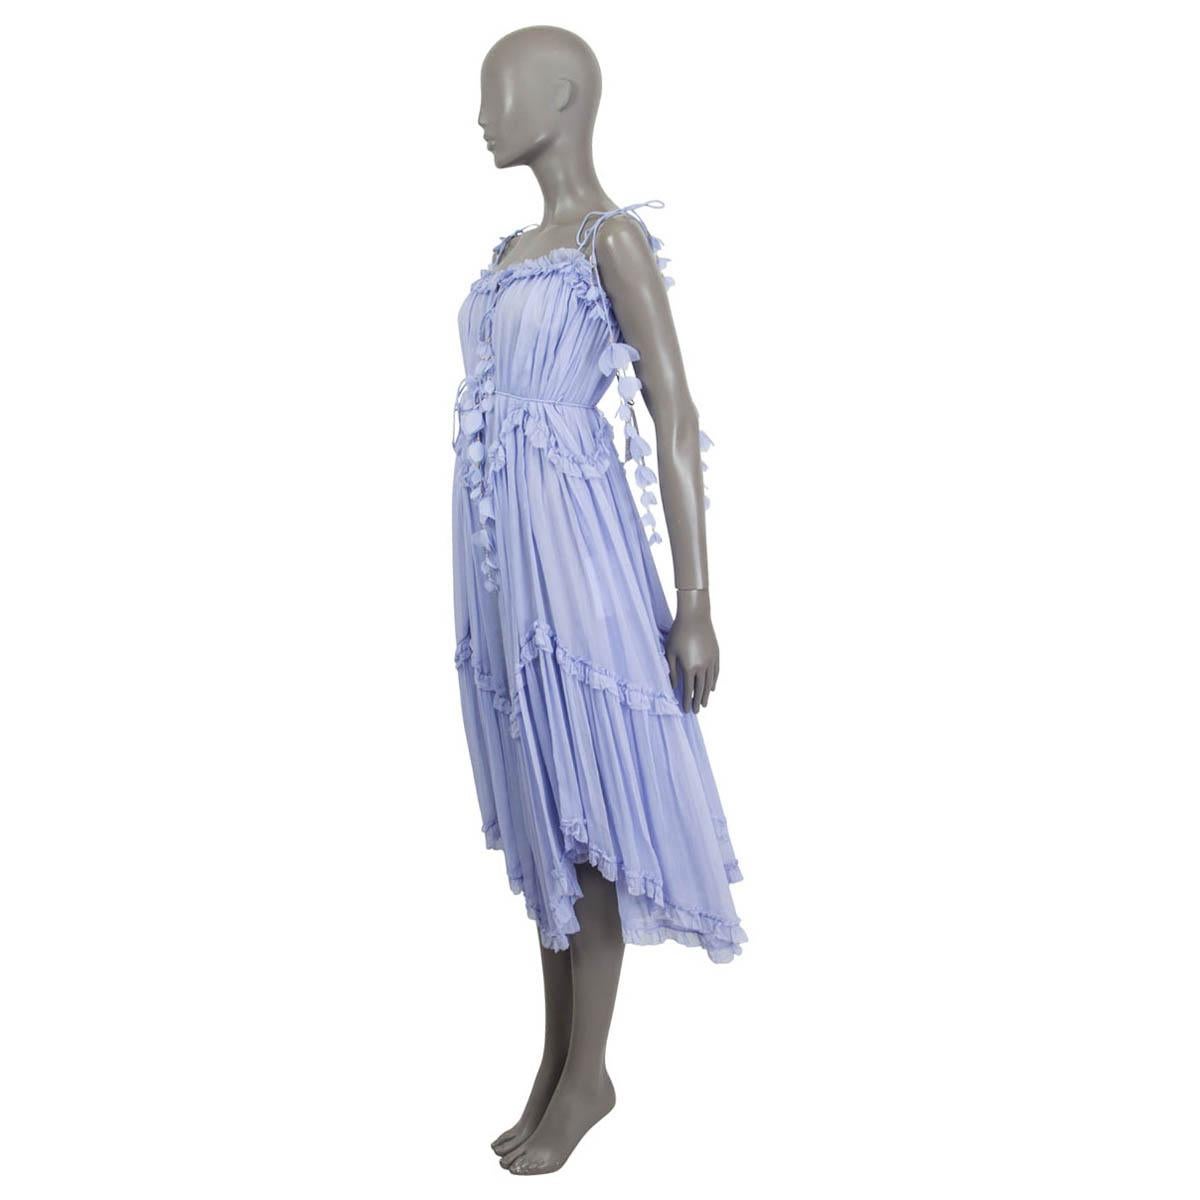 100% authentic Zimmermann belted asymmetric dress in periwinkle (purple) viscose (100%). Features tassels and ruched details. Lined in periwinkle viscose (100%). Brand new, with tags.

Measurements
Tag Size	1
Size	S
Bust	88cm (34.3in) to 112cm